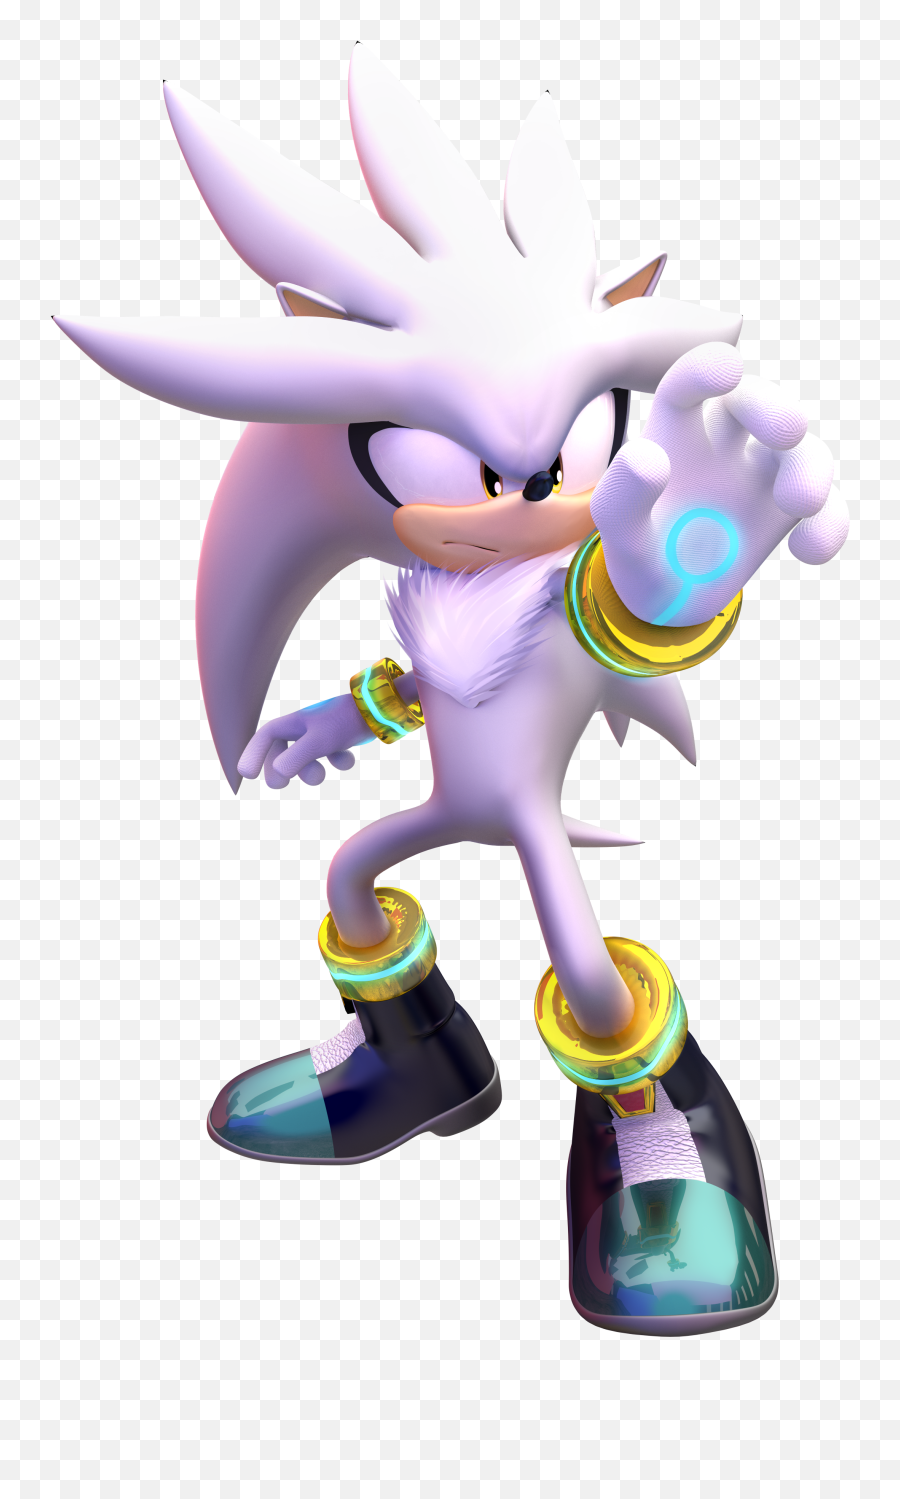 Silver The Hedgehog Sonic Heroes Full Size Png Download - Sonic The Hedgehog Team Silver,Silver The Hedgehog Png